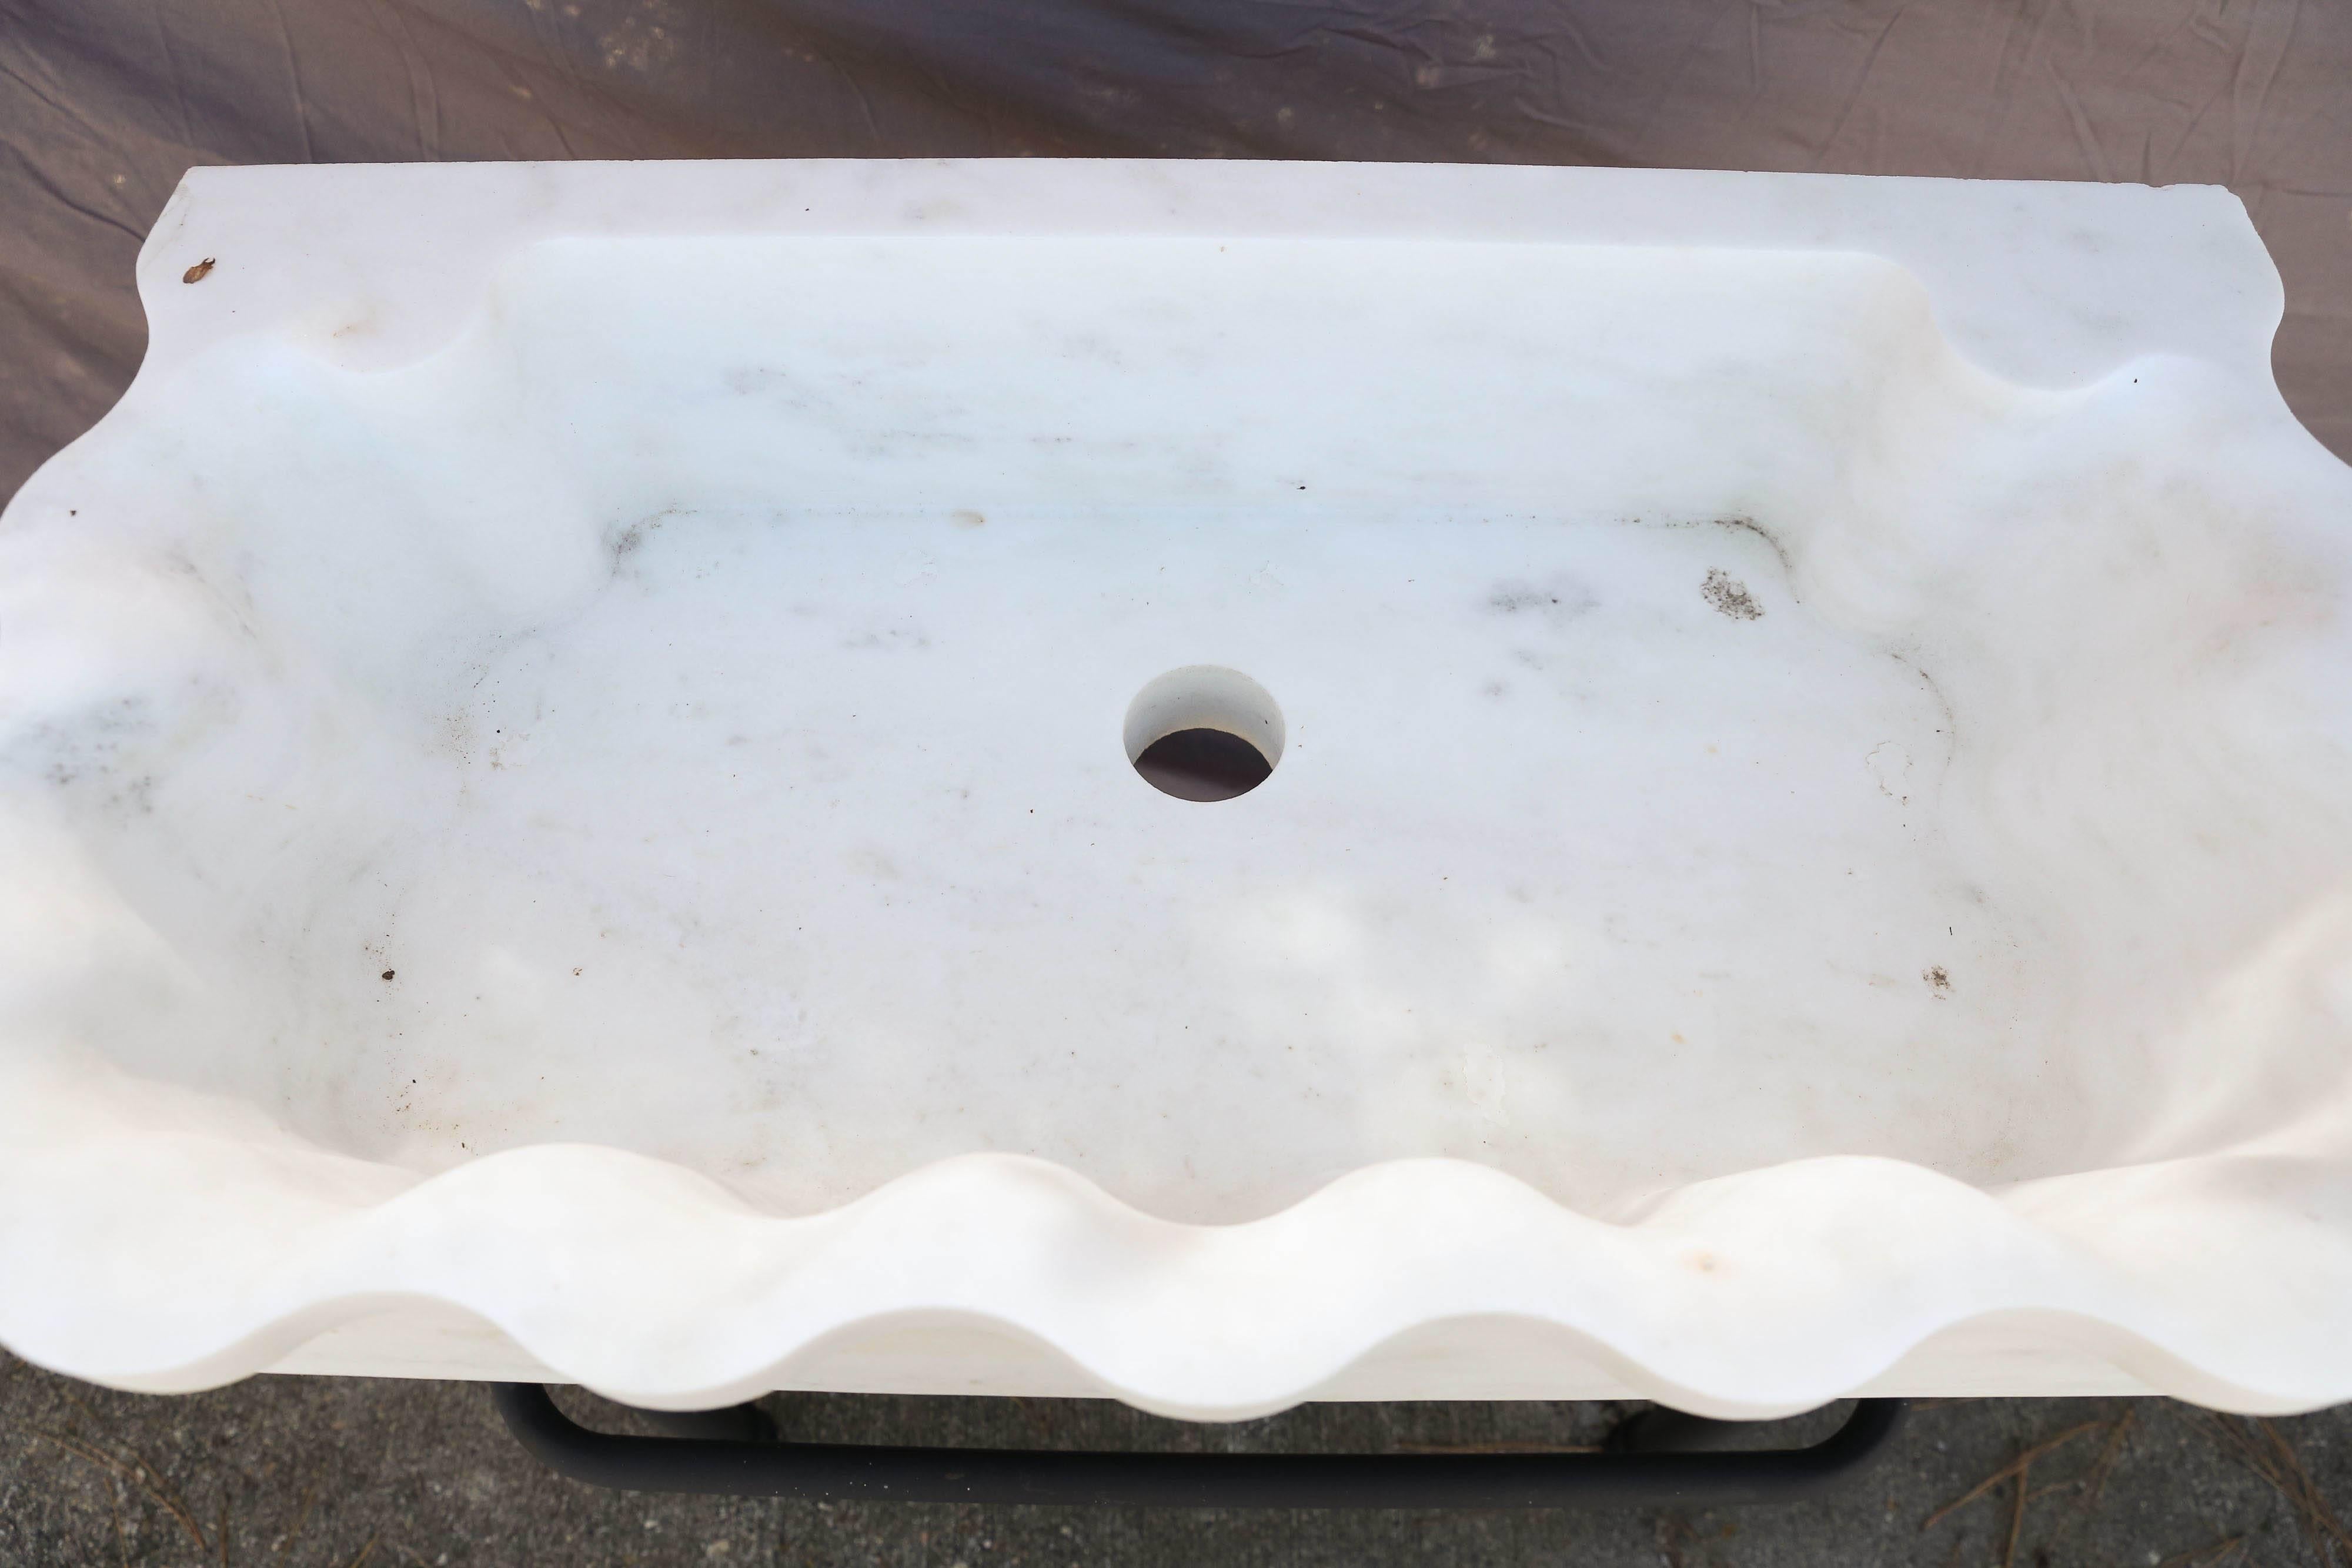 Marble sinks on iron stands were used in the open backyard of colonial homes.
The large marble sink is hand-carved from one block of large fine quality marble slab. The support is made of iron and has a towel rack. It is solid and will last several